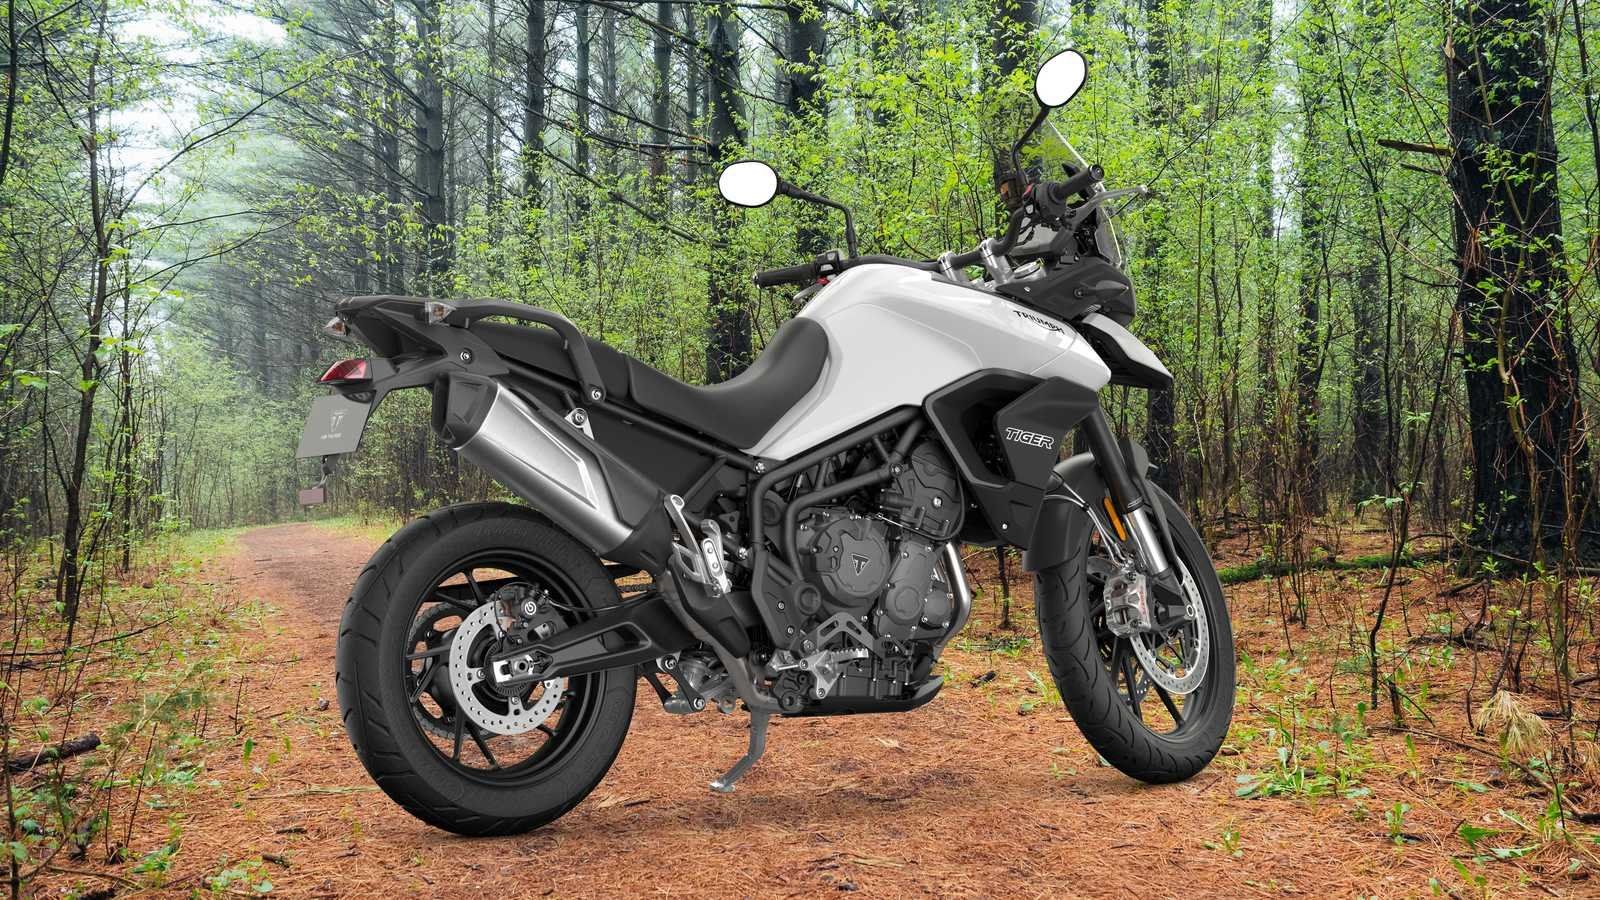 Triumph Tiger: Latest News, Reviews, Specifications, Prices, Photo And Videos